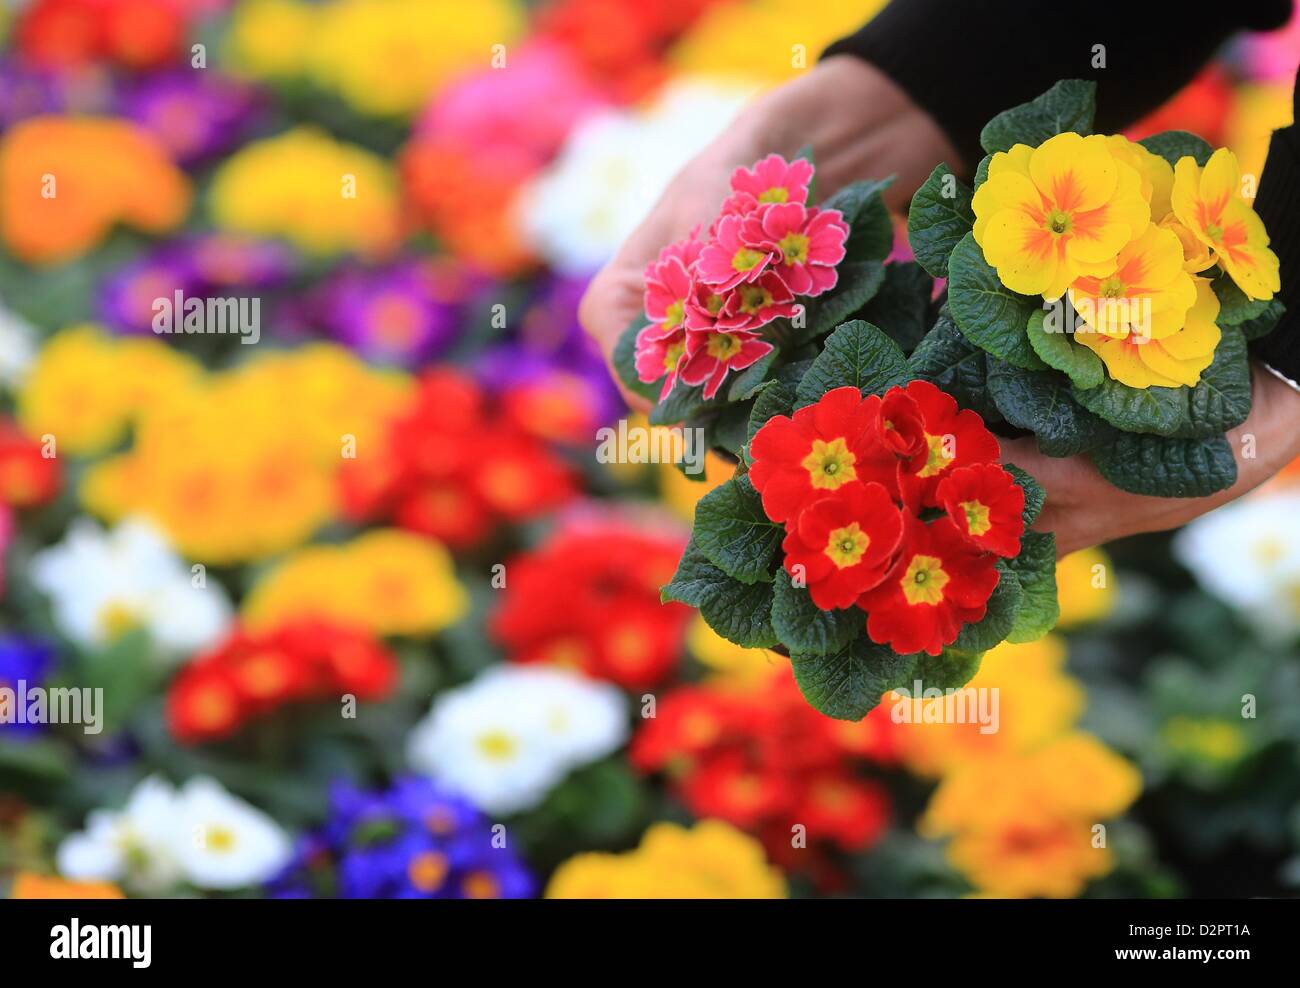 Genthin, Germany. 29th January 2013. Primroses are inspected in the heated greenhouse in Genthiner Gartenbau GmbH in Genthin, Germany, 29 January 2013. Over a million of these well-loved flowers will be grown before the start of March. Photo: Jens Wolf/dpa/Alamy Live News. Stock Photo